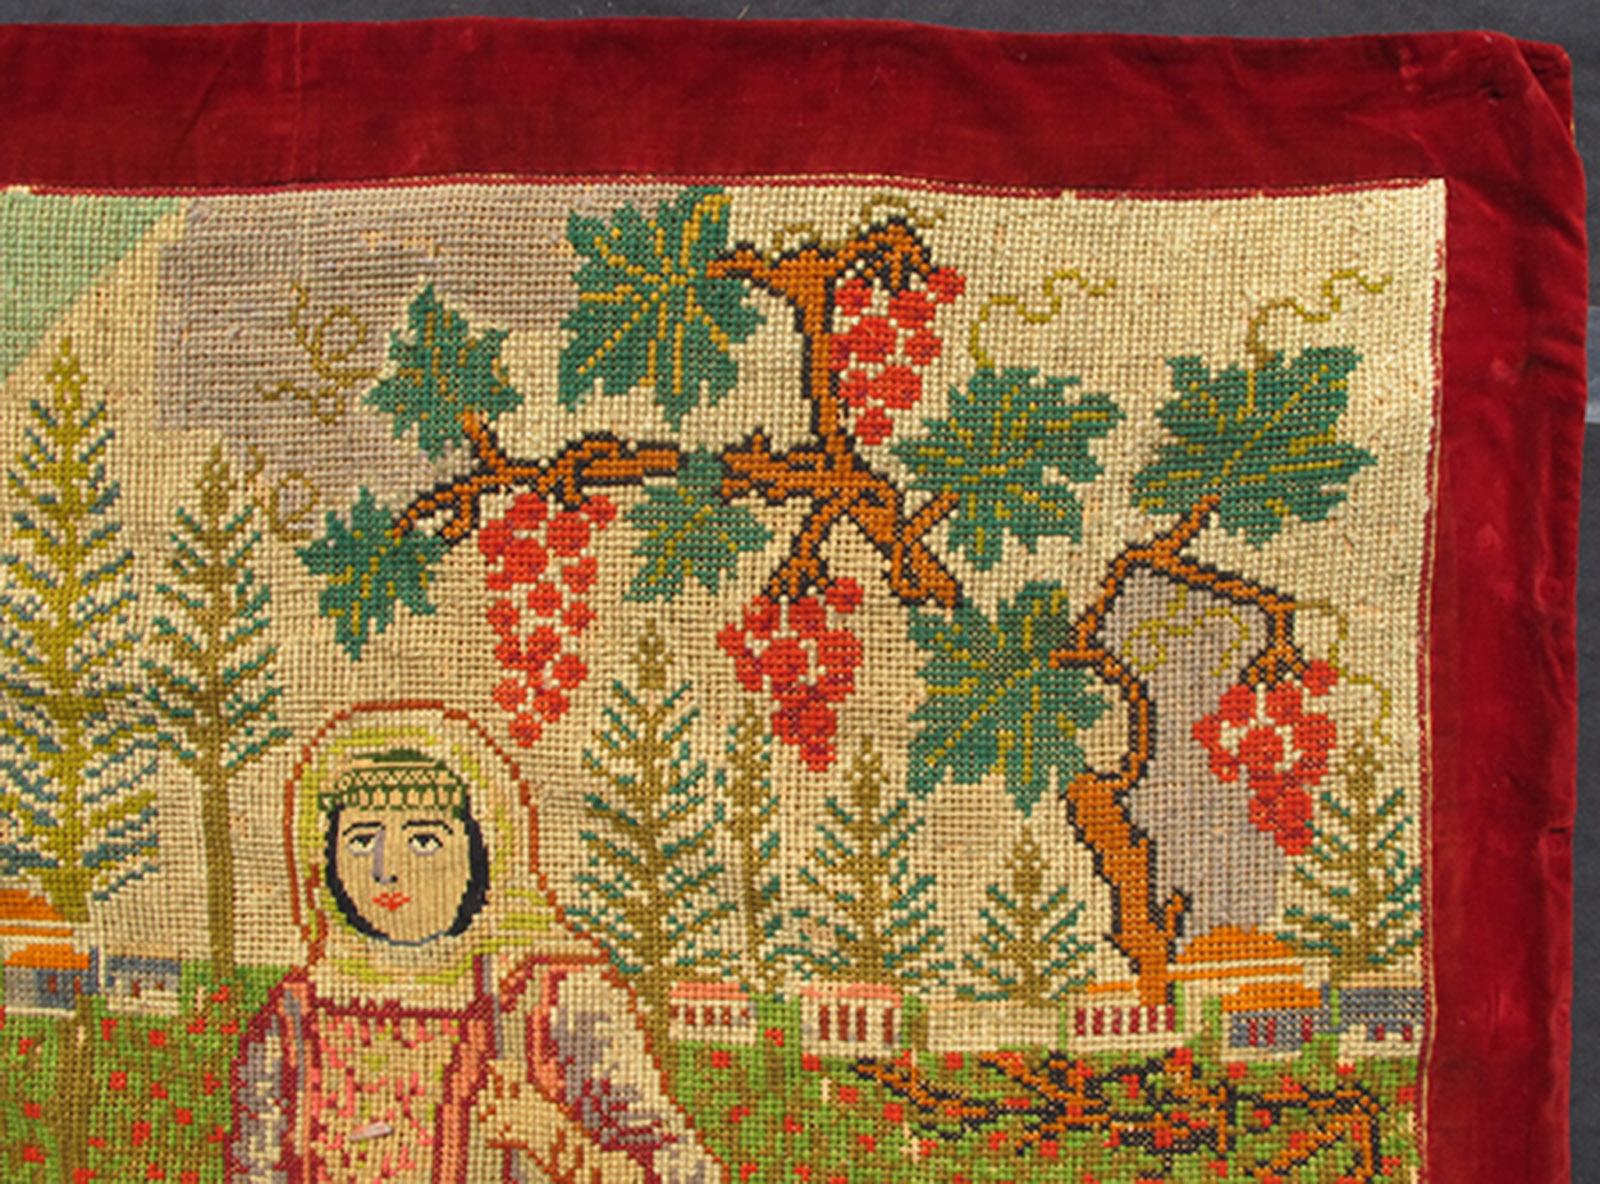 Antique European Folk Art Tapestry with Country Side Scene in Bright Colors, Rug / S12-0526. A unique tapestry, Folk Art Tapestry, Needle point and Petite point, Probably from Eastern Europe. A scenic tapestry of country side with vivid colors,